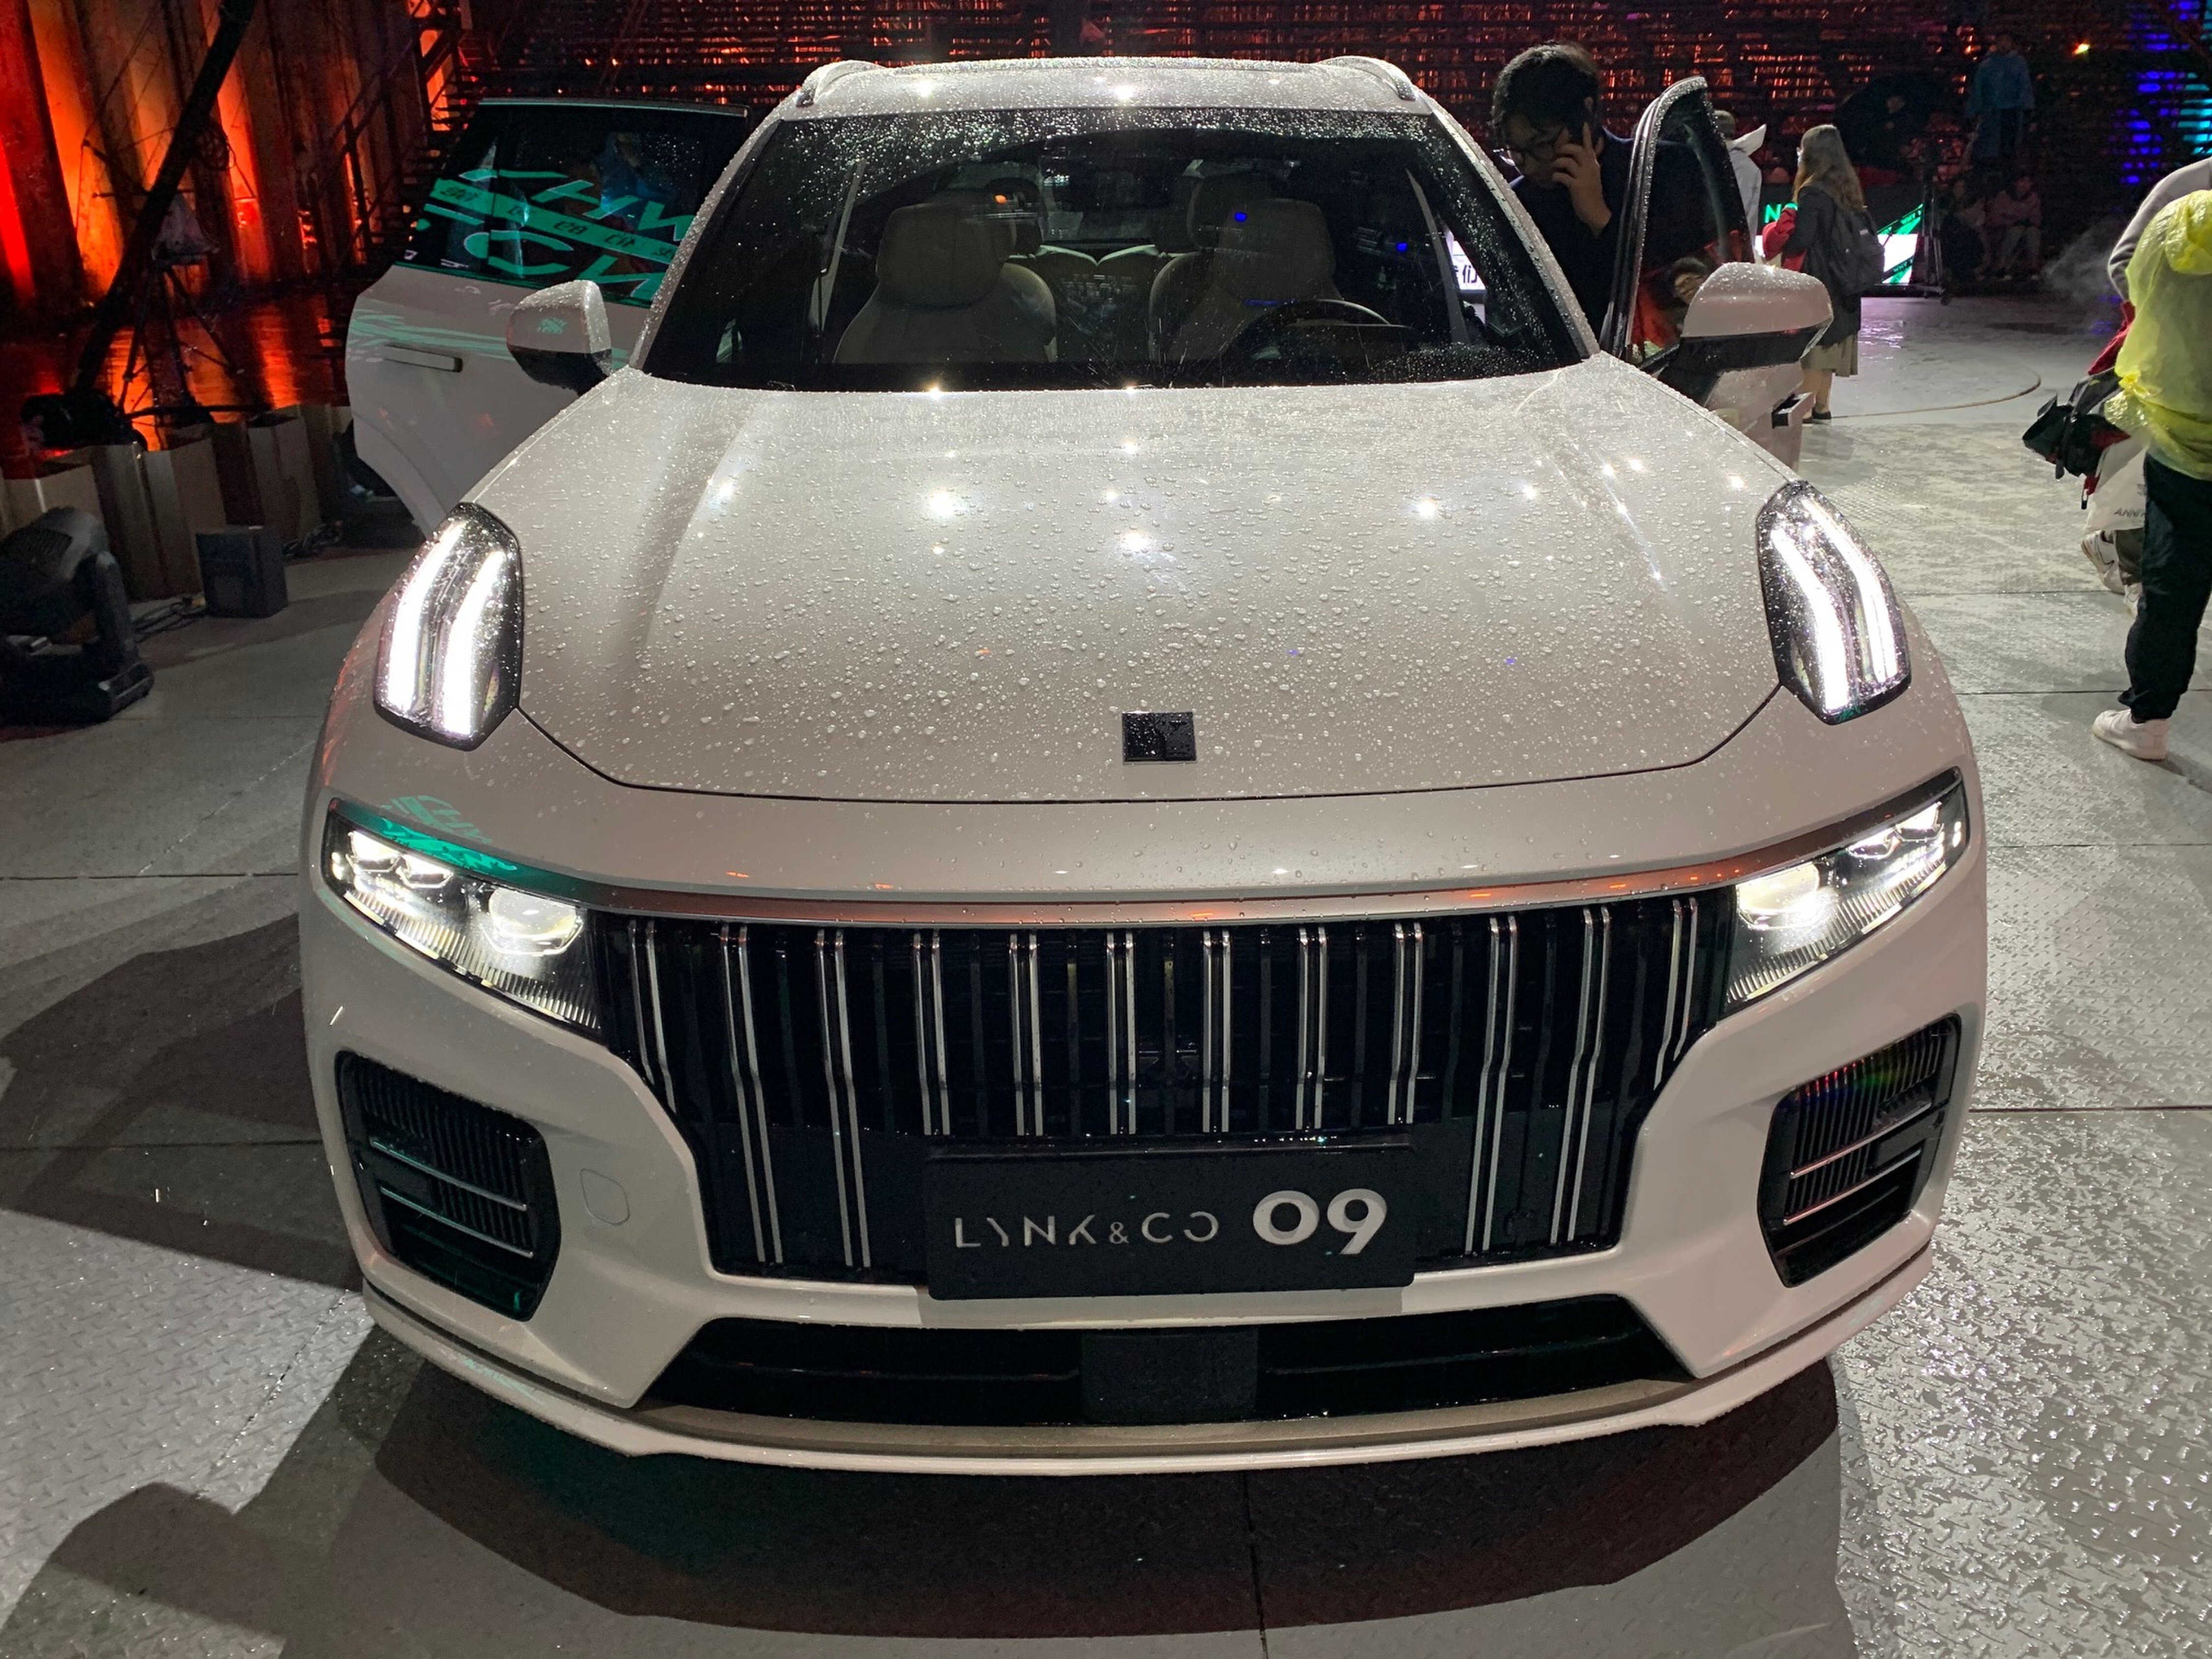 A Lynk & Co 09 SUV is displayed at its launch ceremony in Shanghai on Wednesday. Photo: Daniel Ren